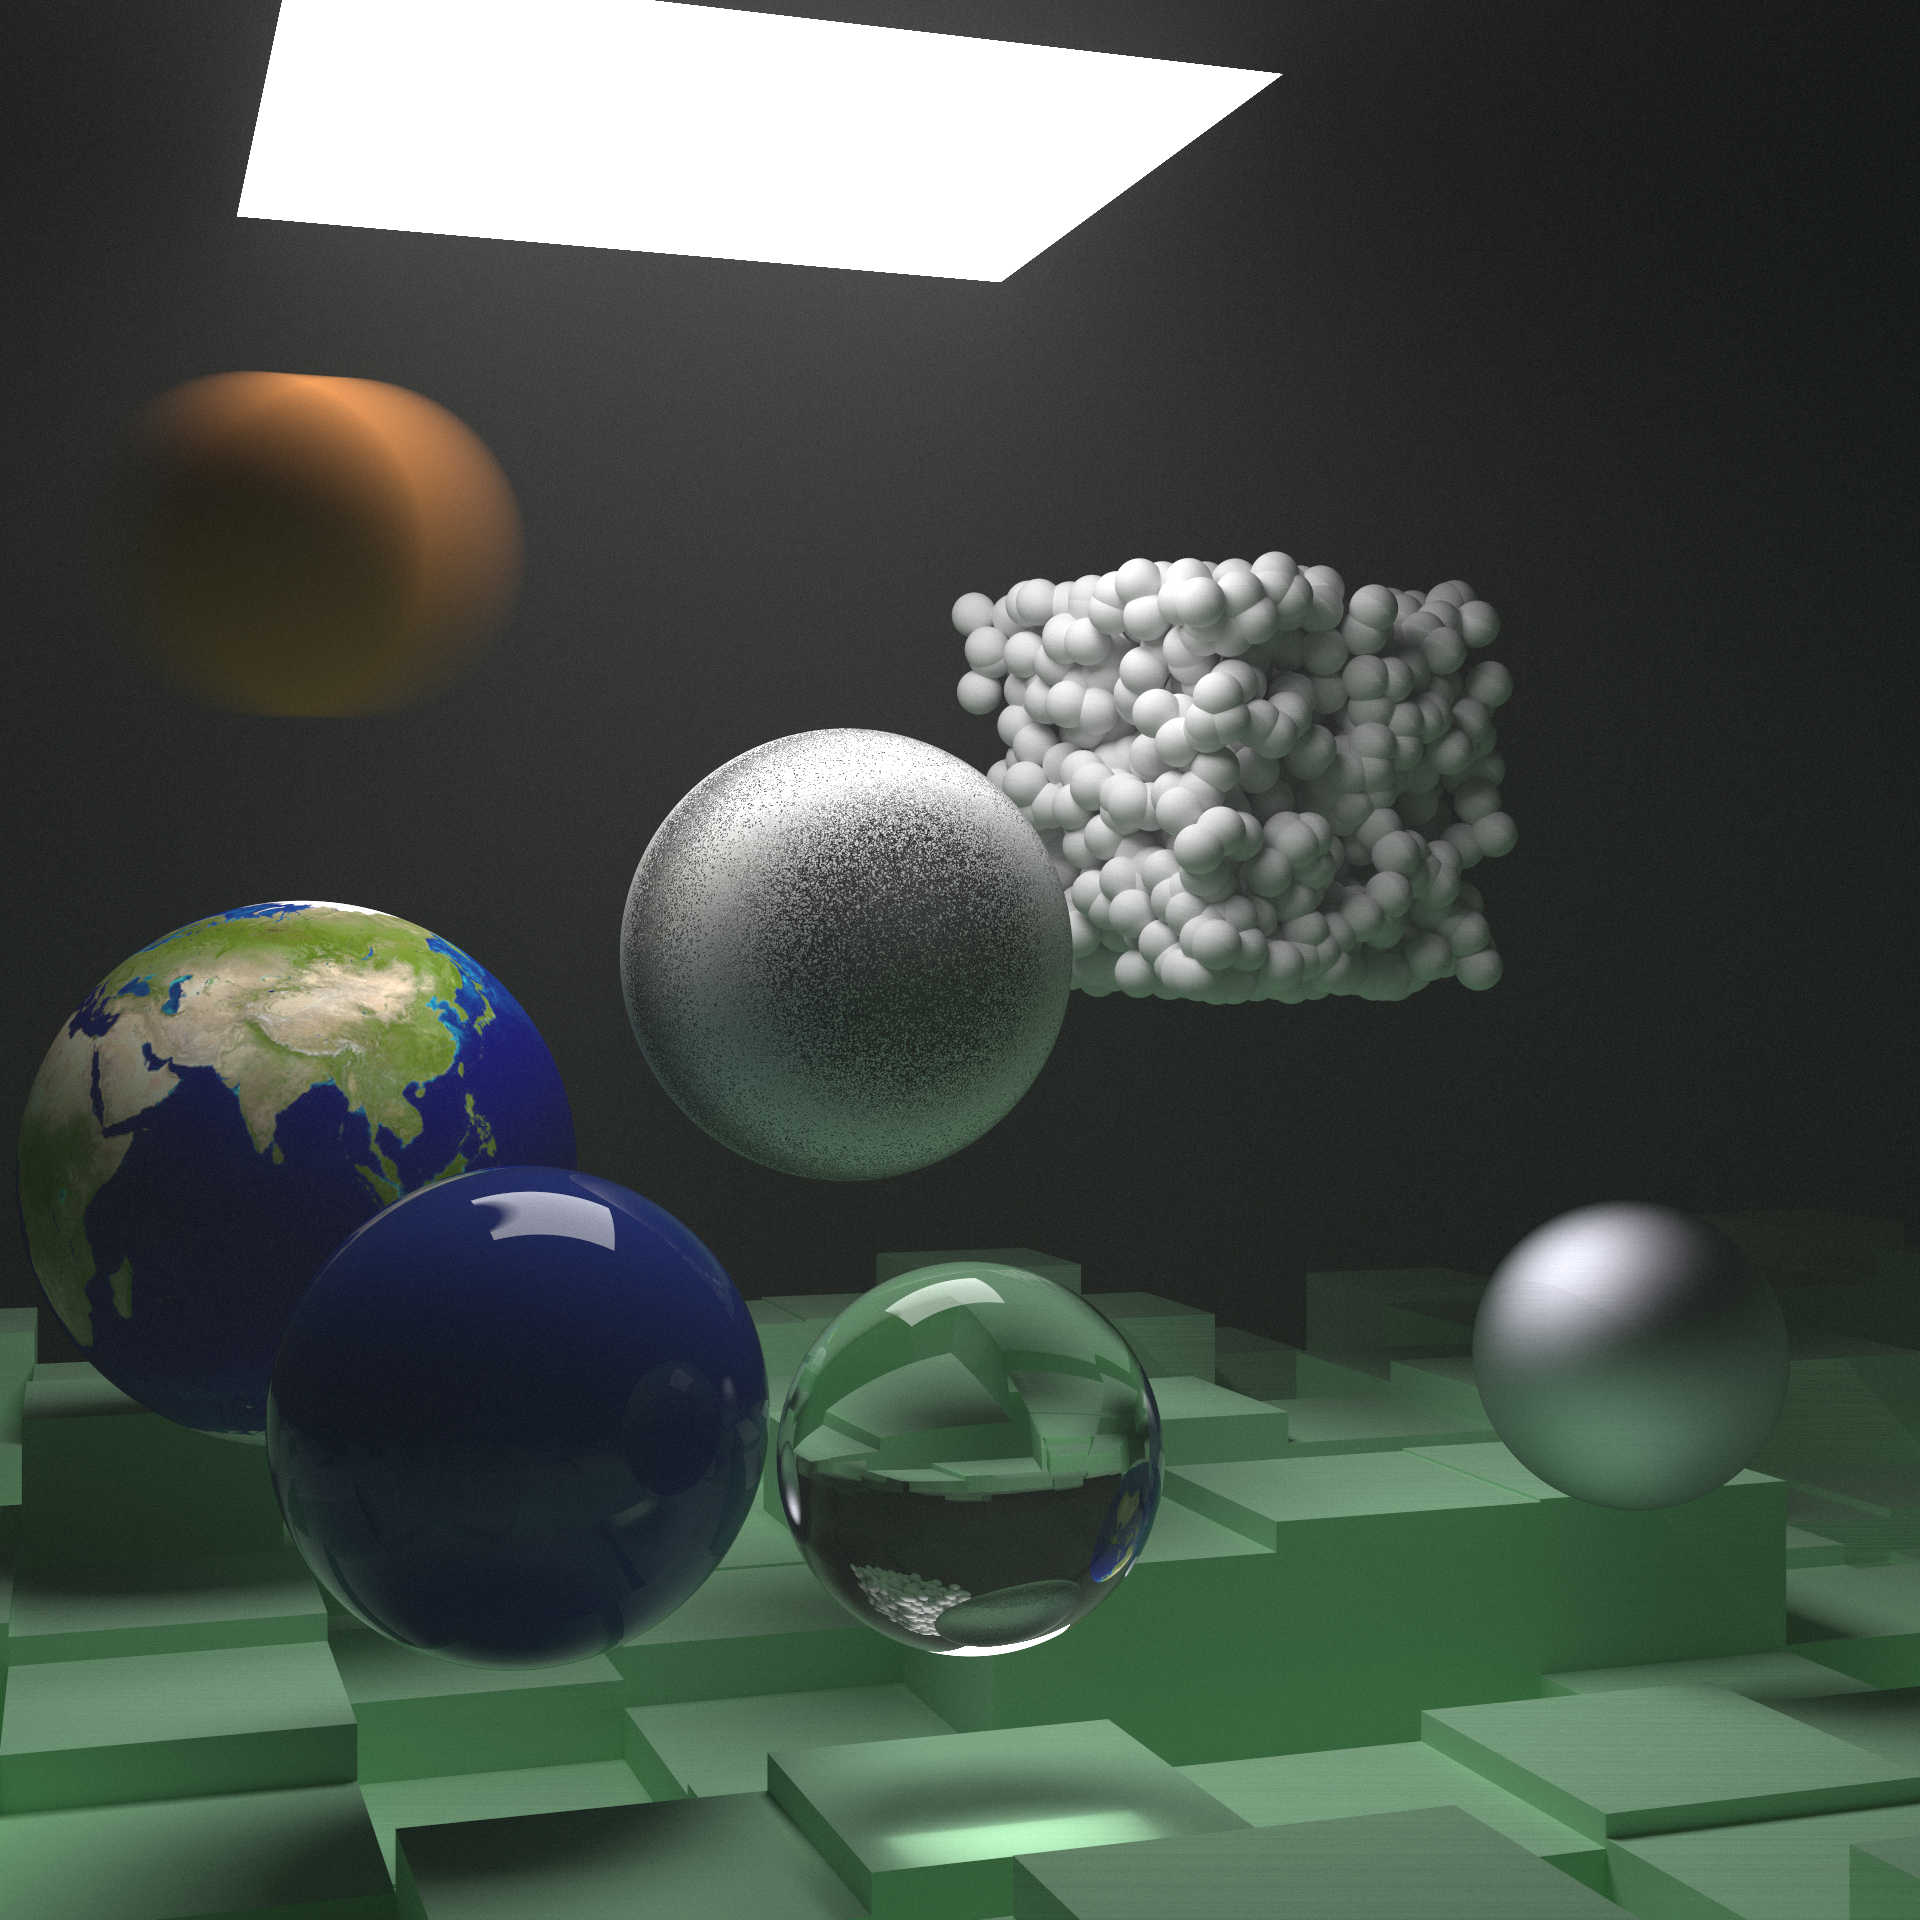 A collection of spheres in an isotropic scattering colume, showcasing the featureset of the renderer